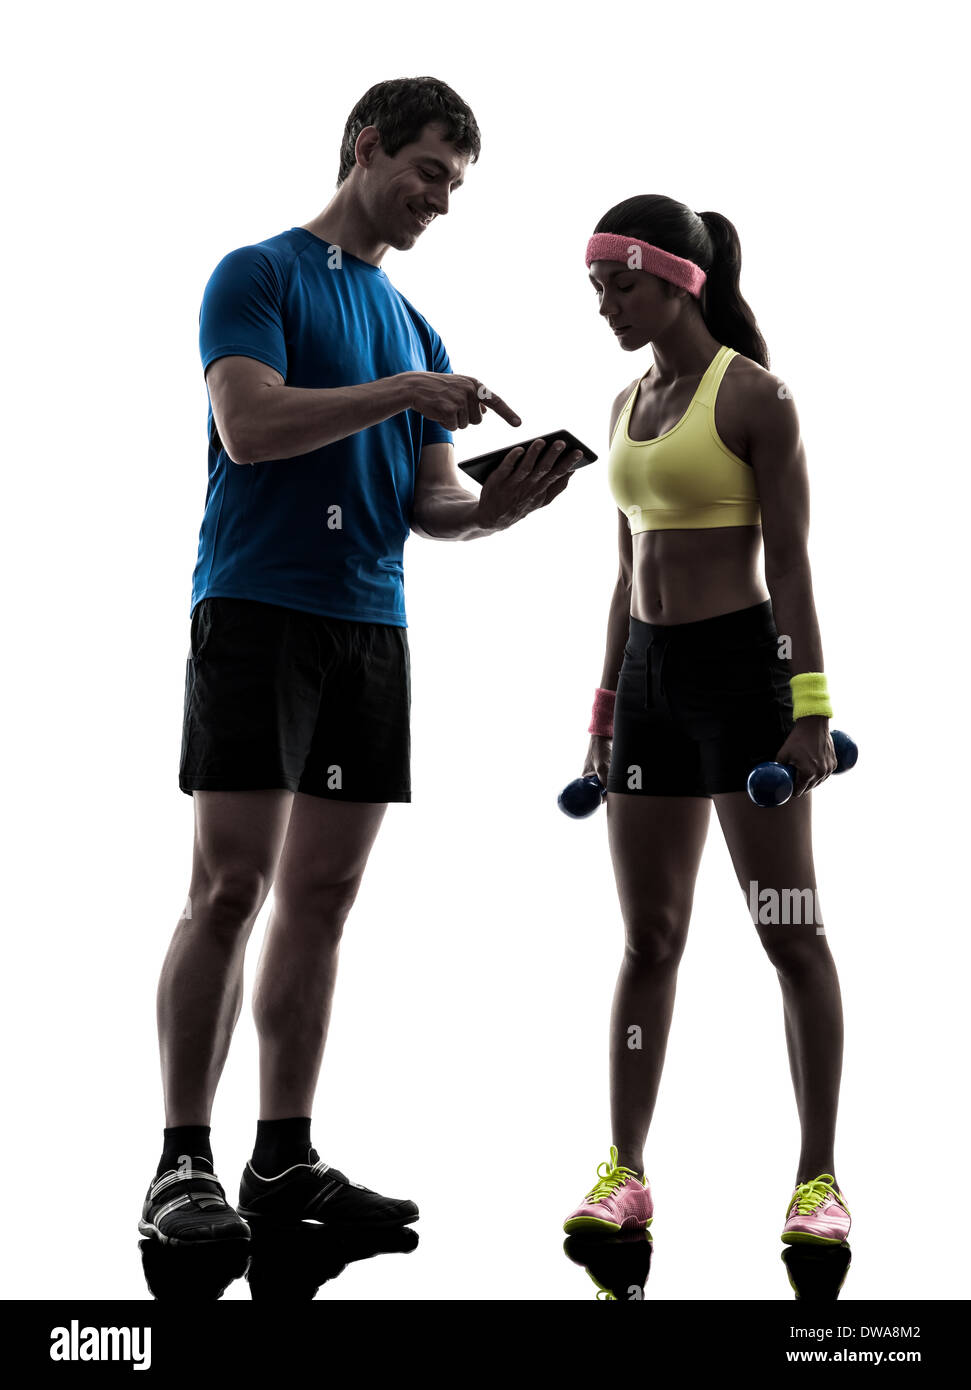 one woman exercising fitness workout with man coach using digital tablet in silhouette on white background Stock Photo